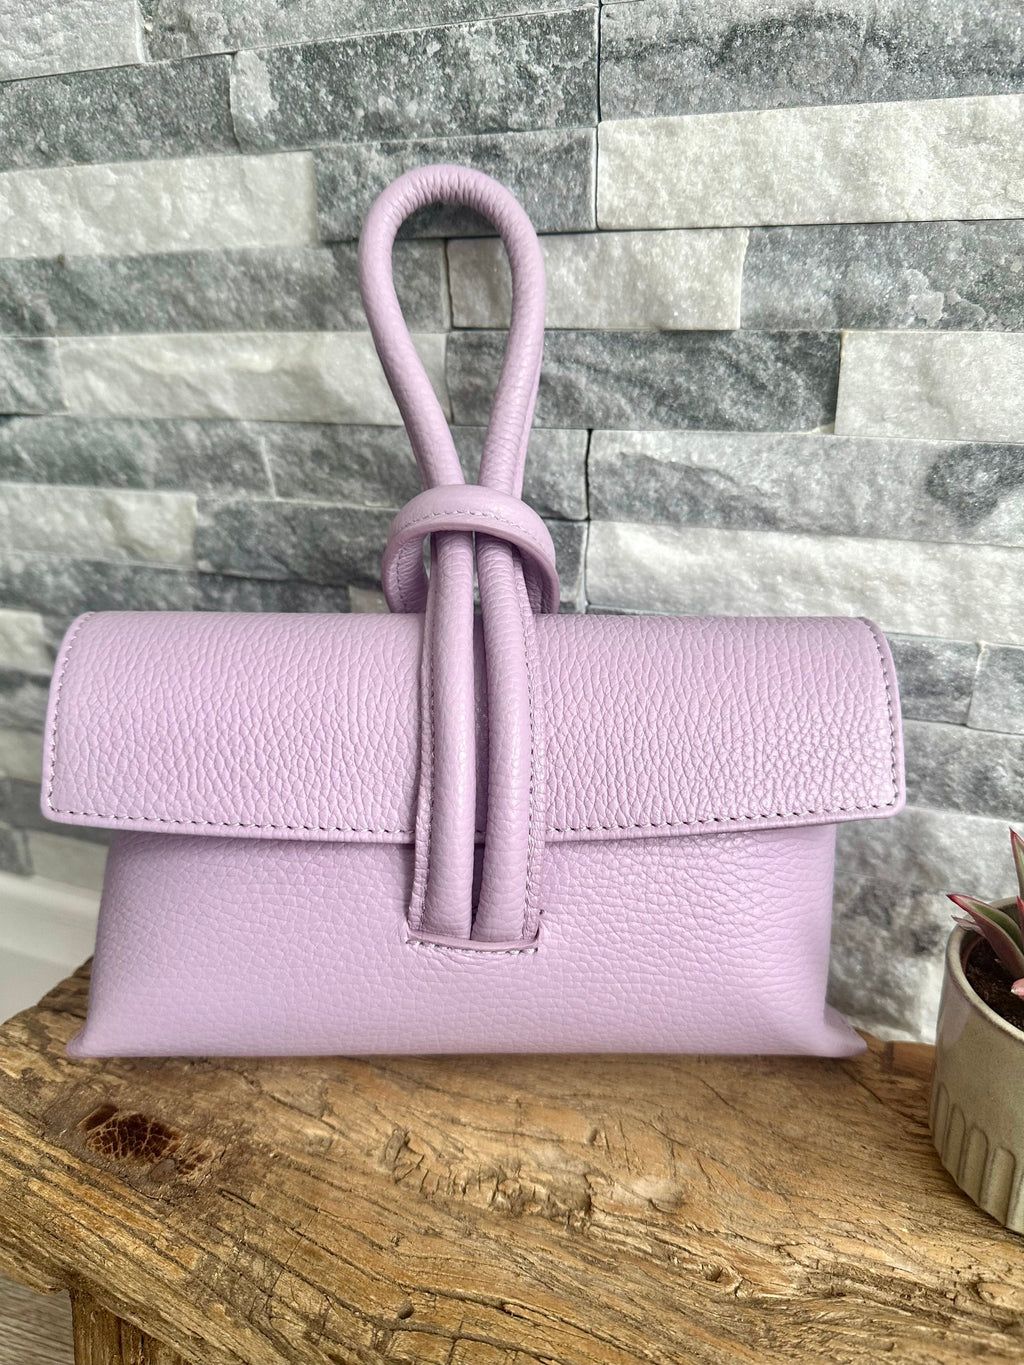 lusciousscarves Lilac Italian Leather Clutch Bag, Evening Bag with Loop Handle.